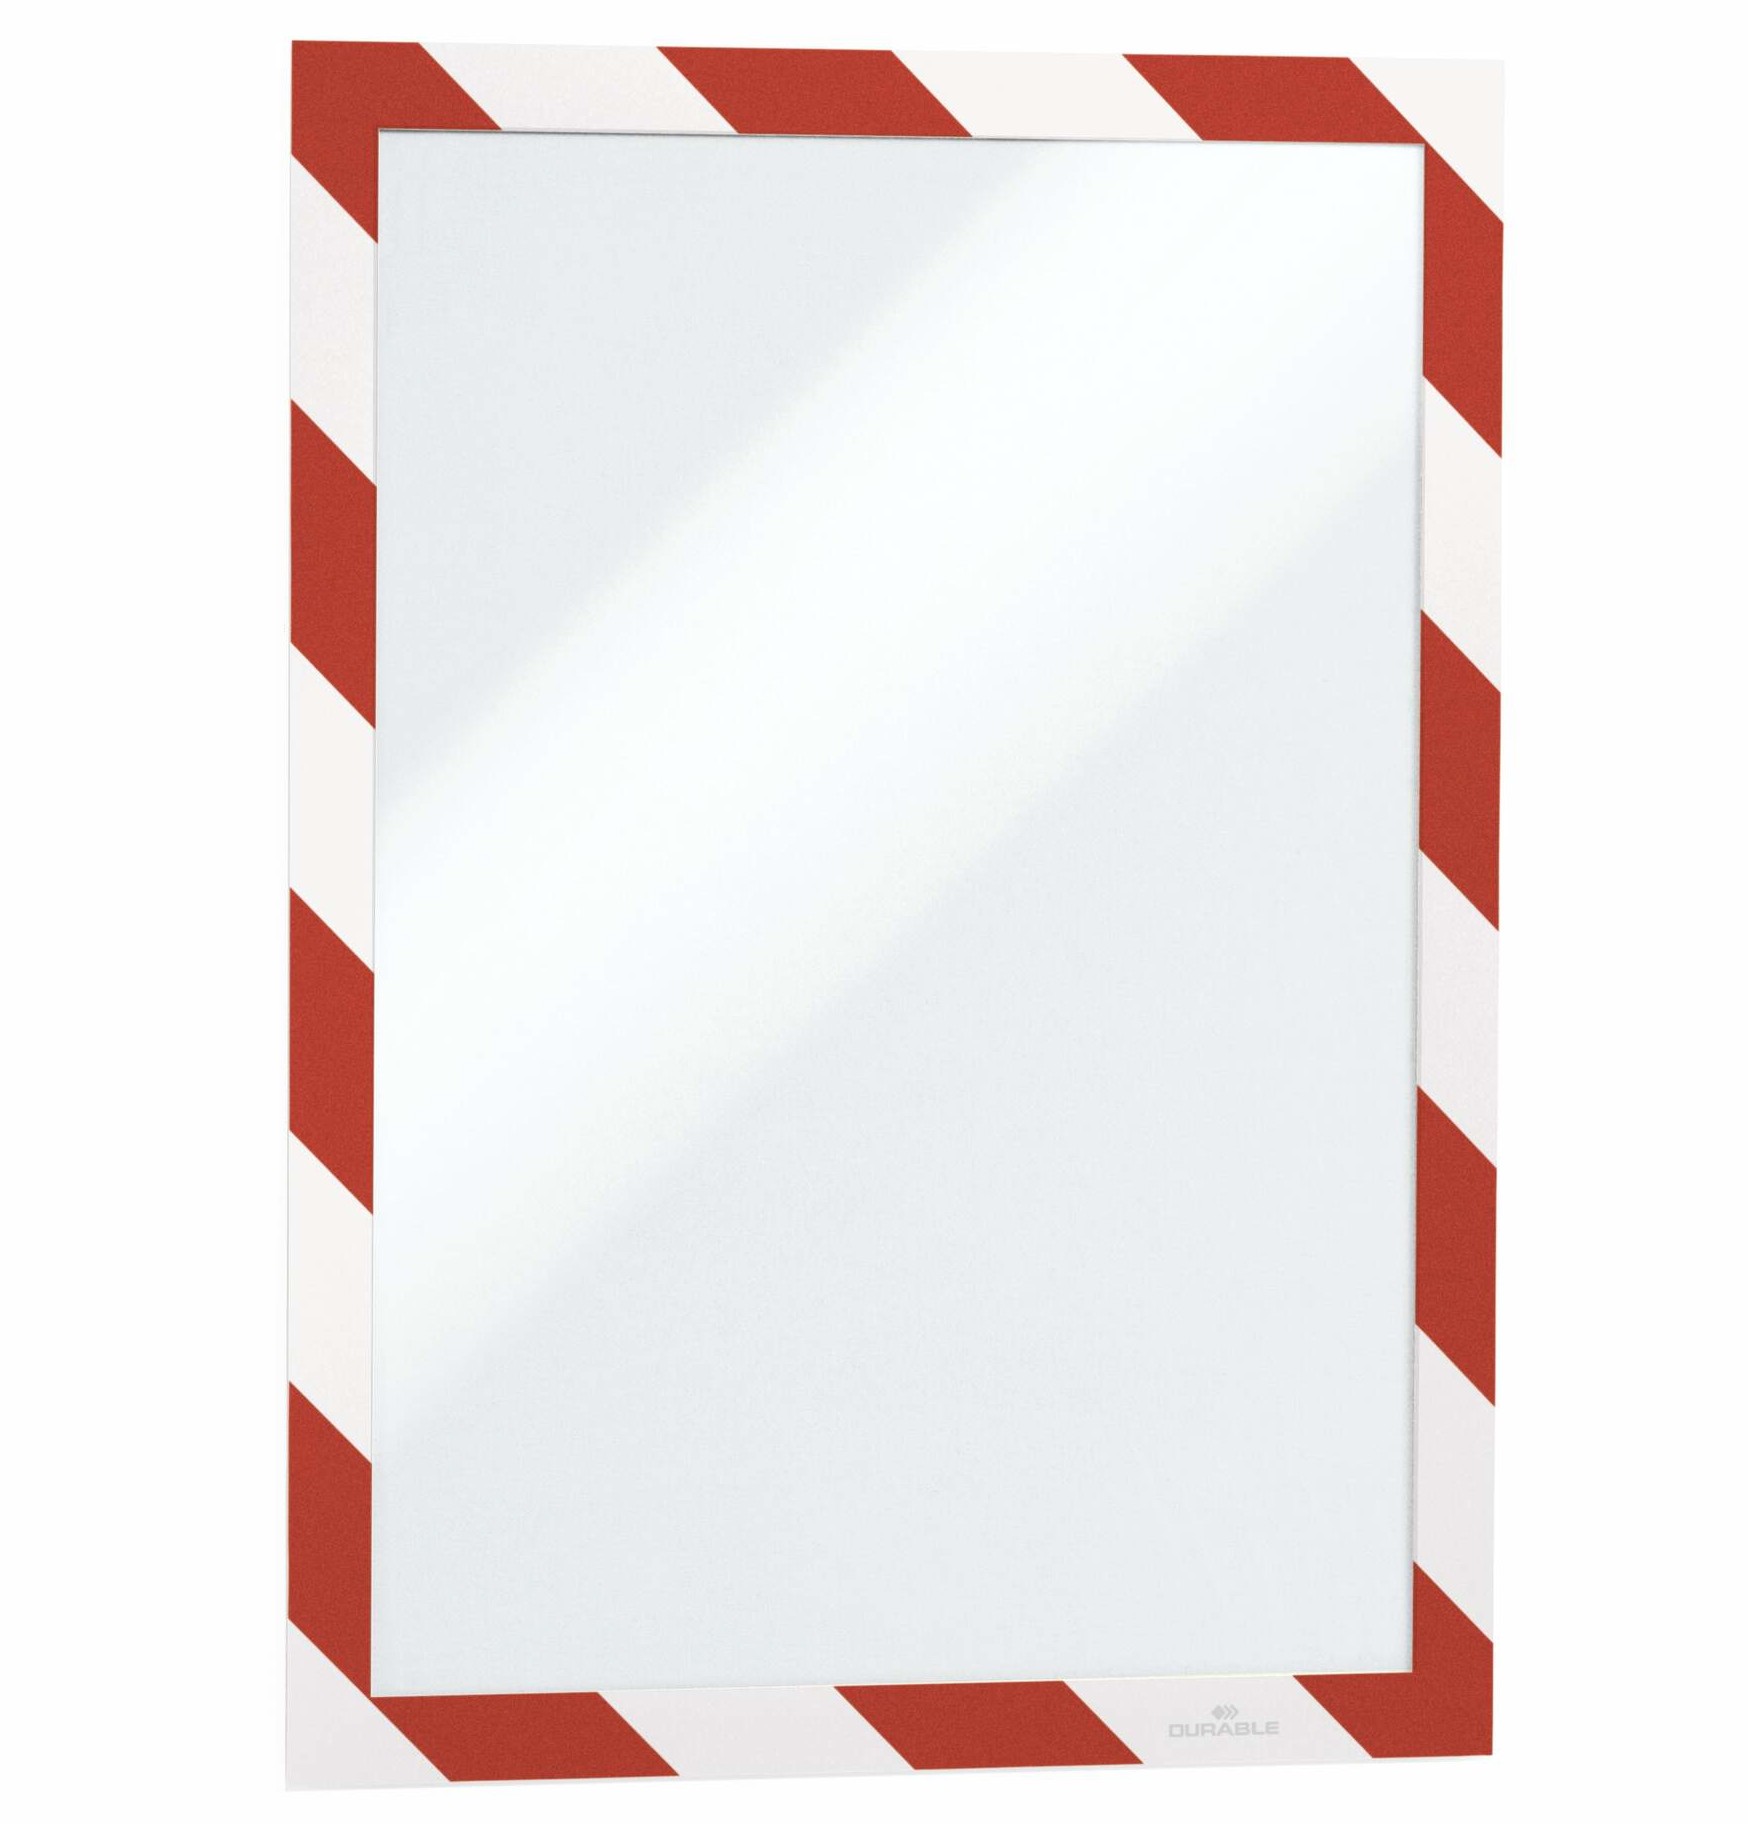 Self-adhesive double-sided A4 information frames in warning colors